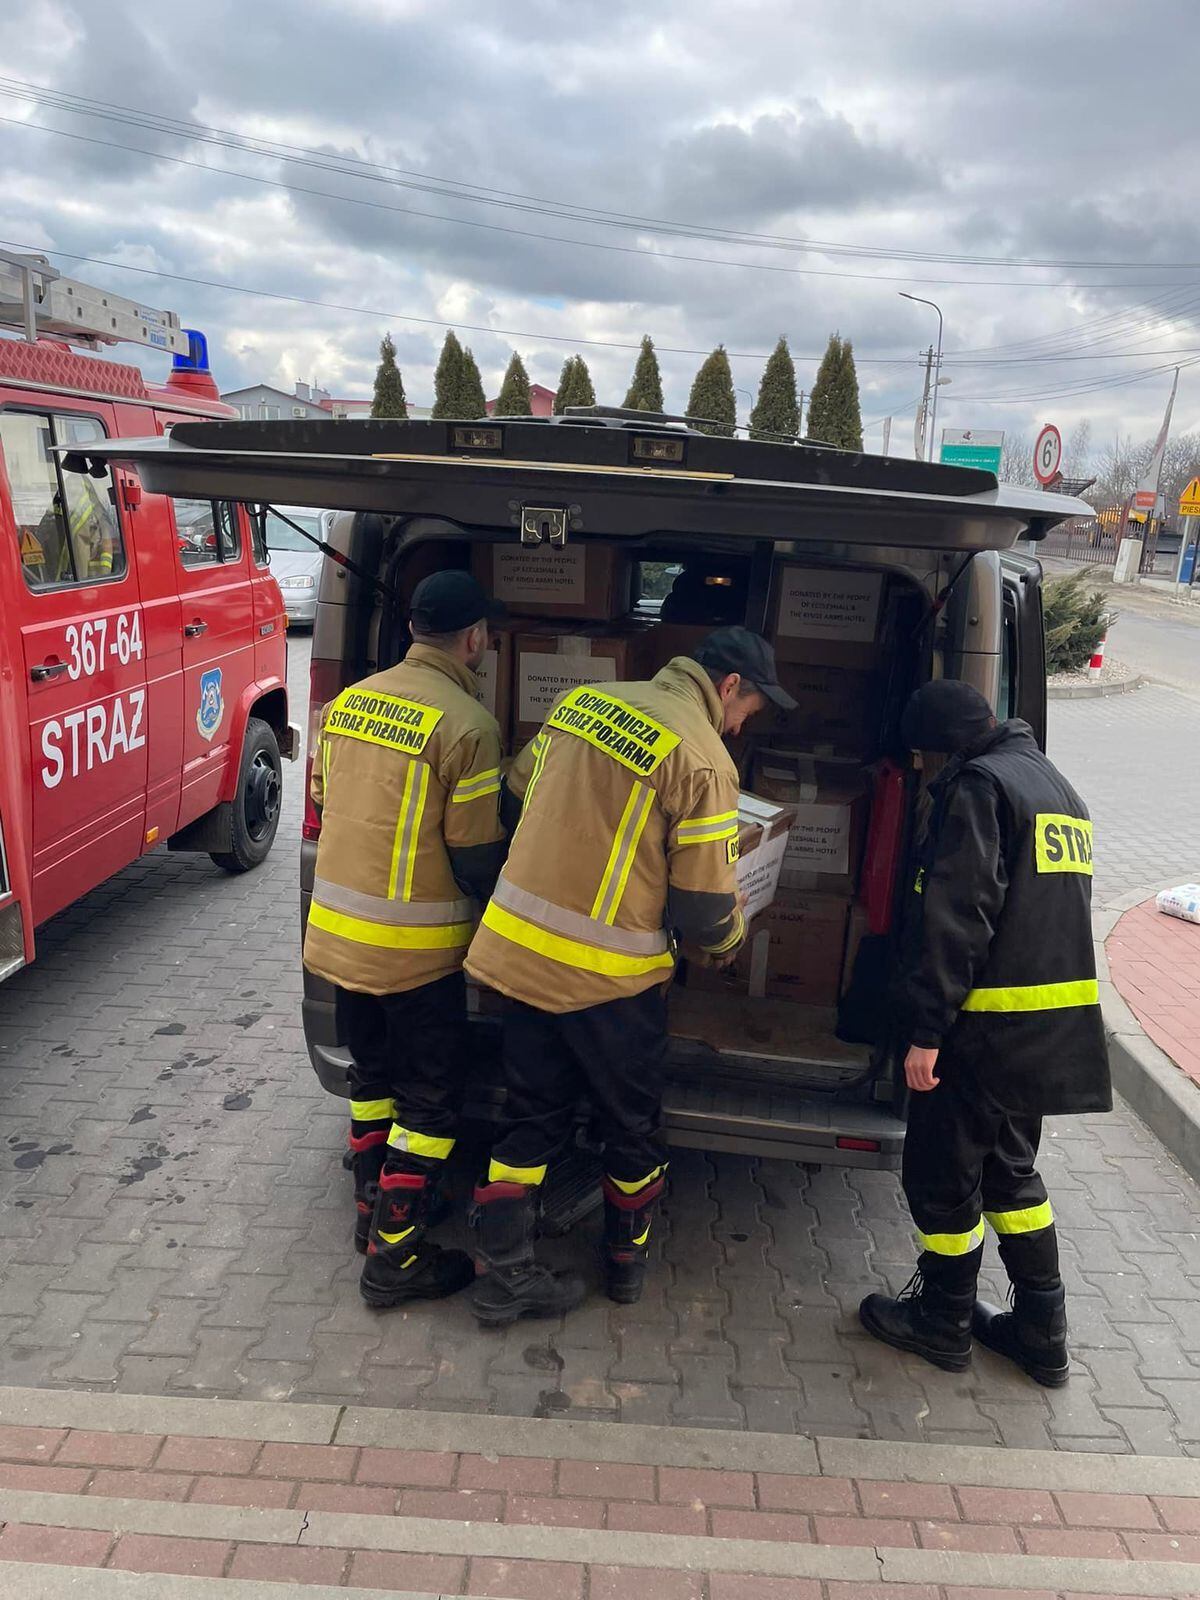 The firefighters help unload the aid. Picture: Facebook